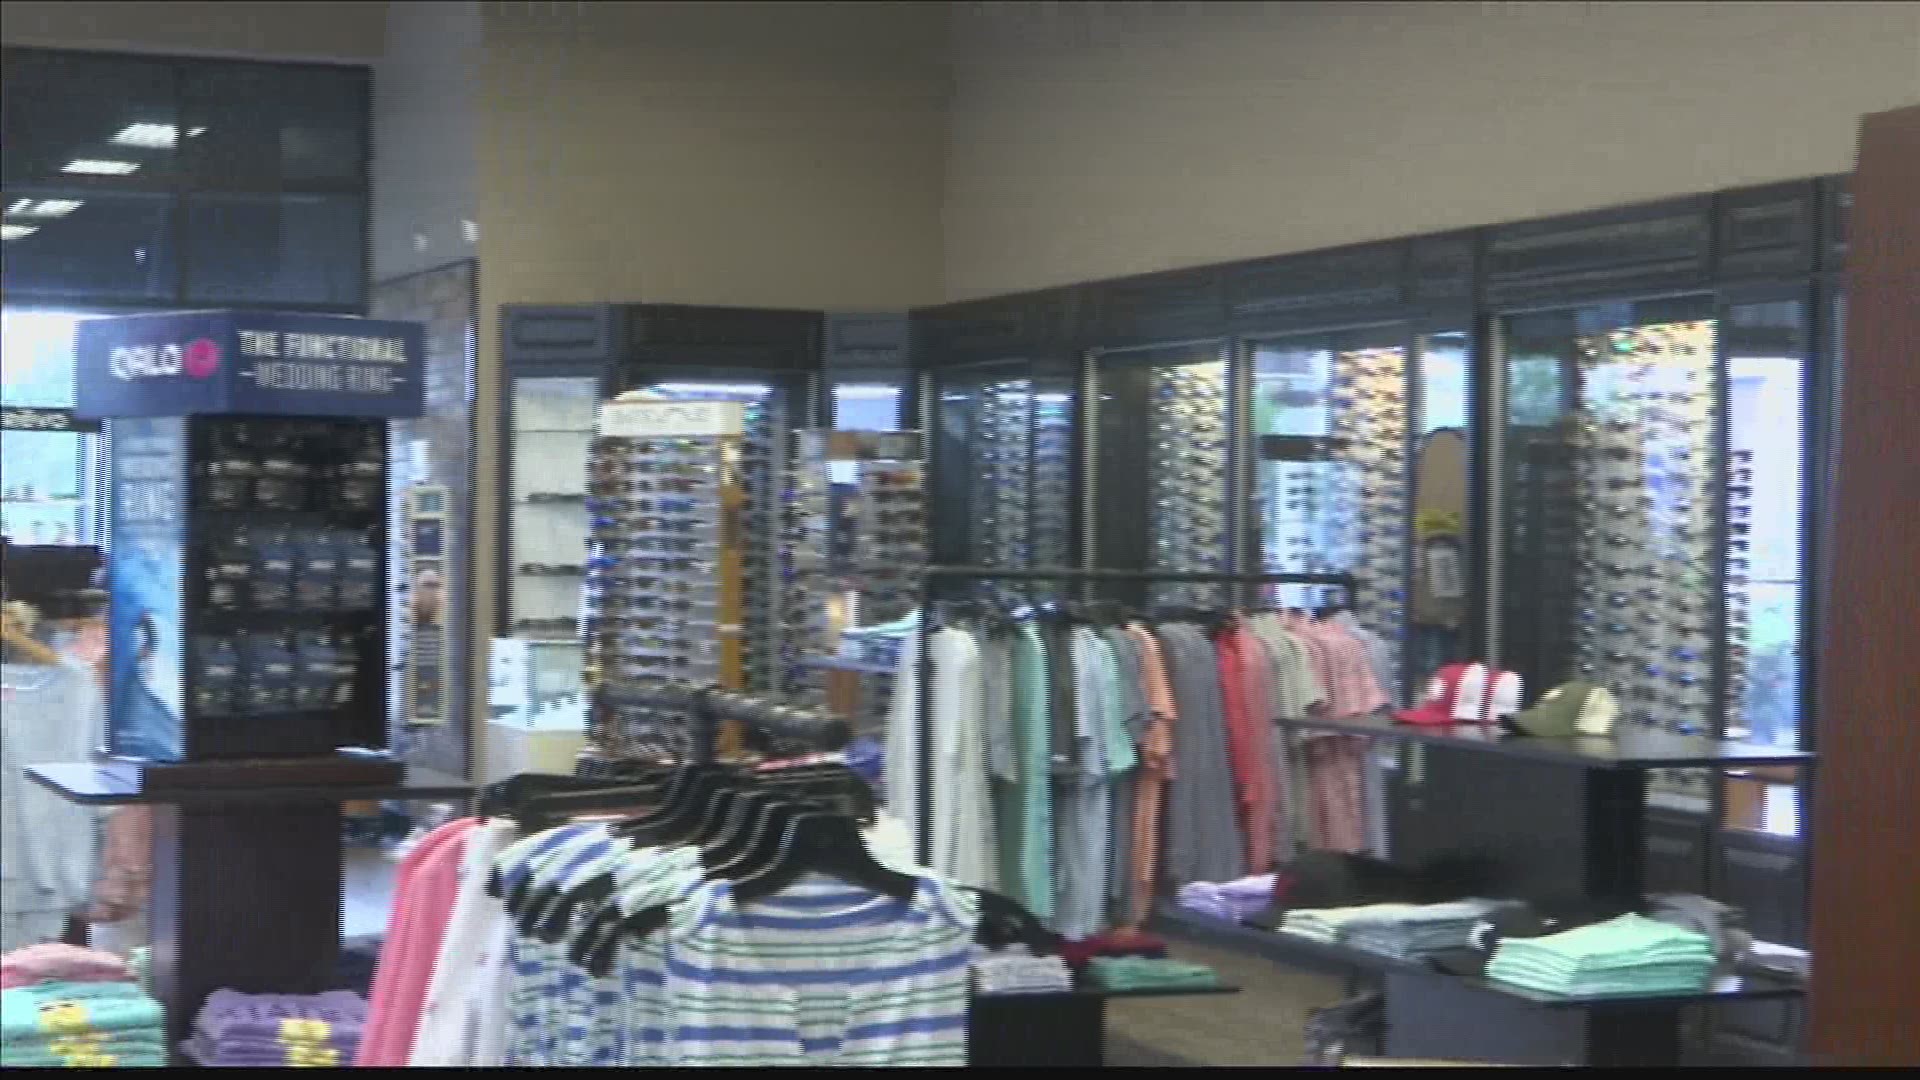 The statewide mask mandate has changed the way folks shop, and also how businesses operate.